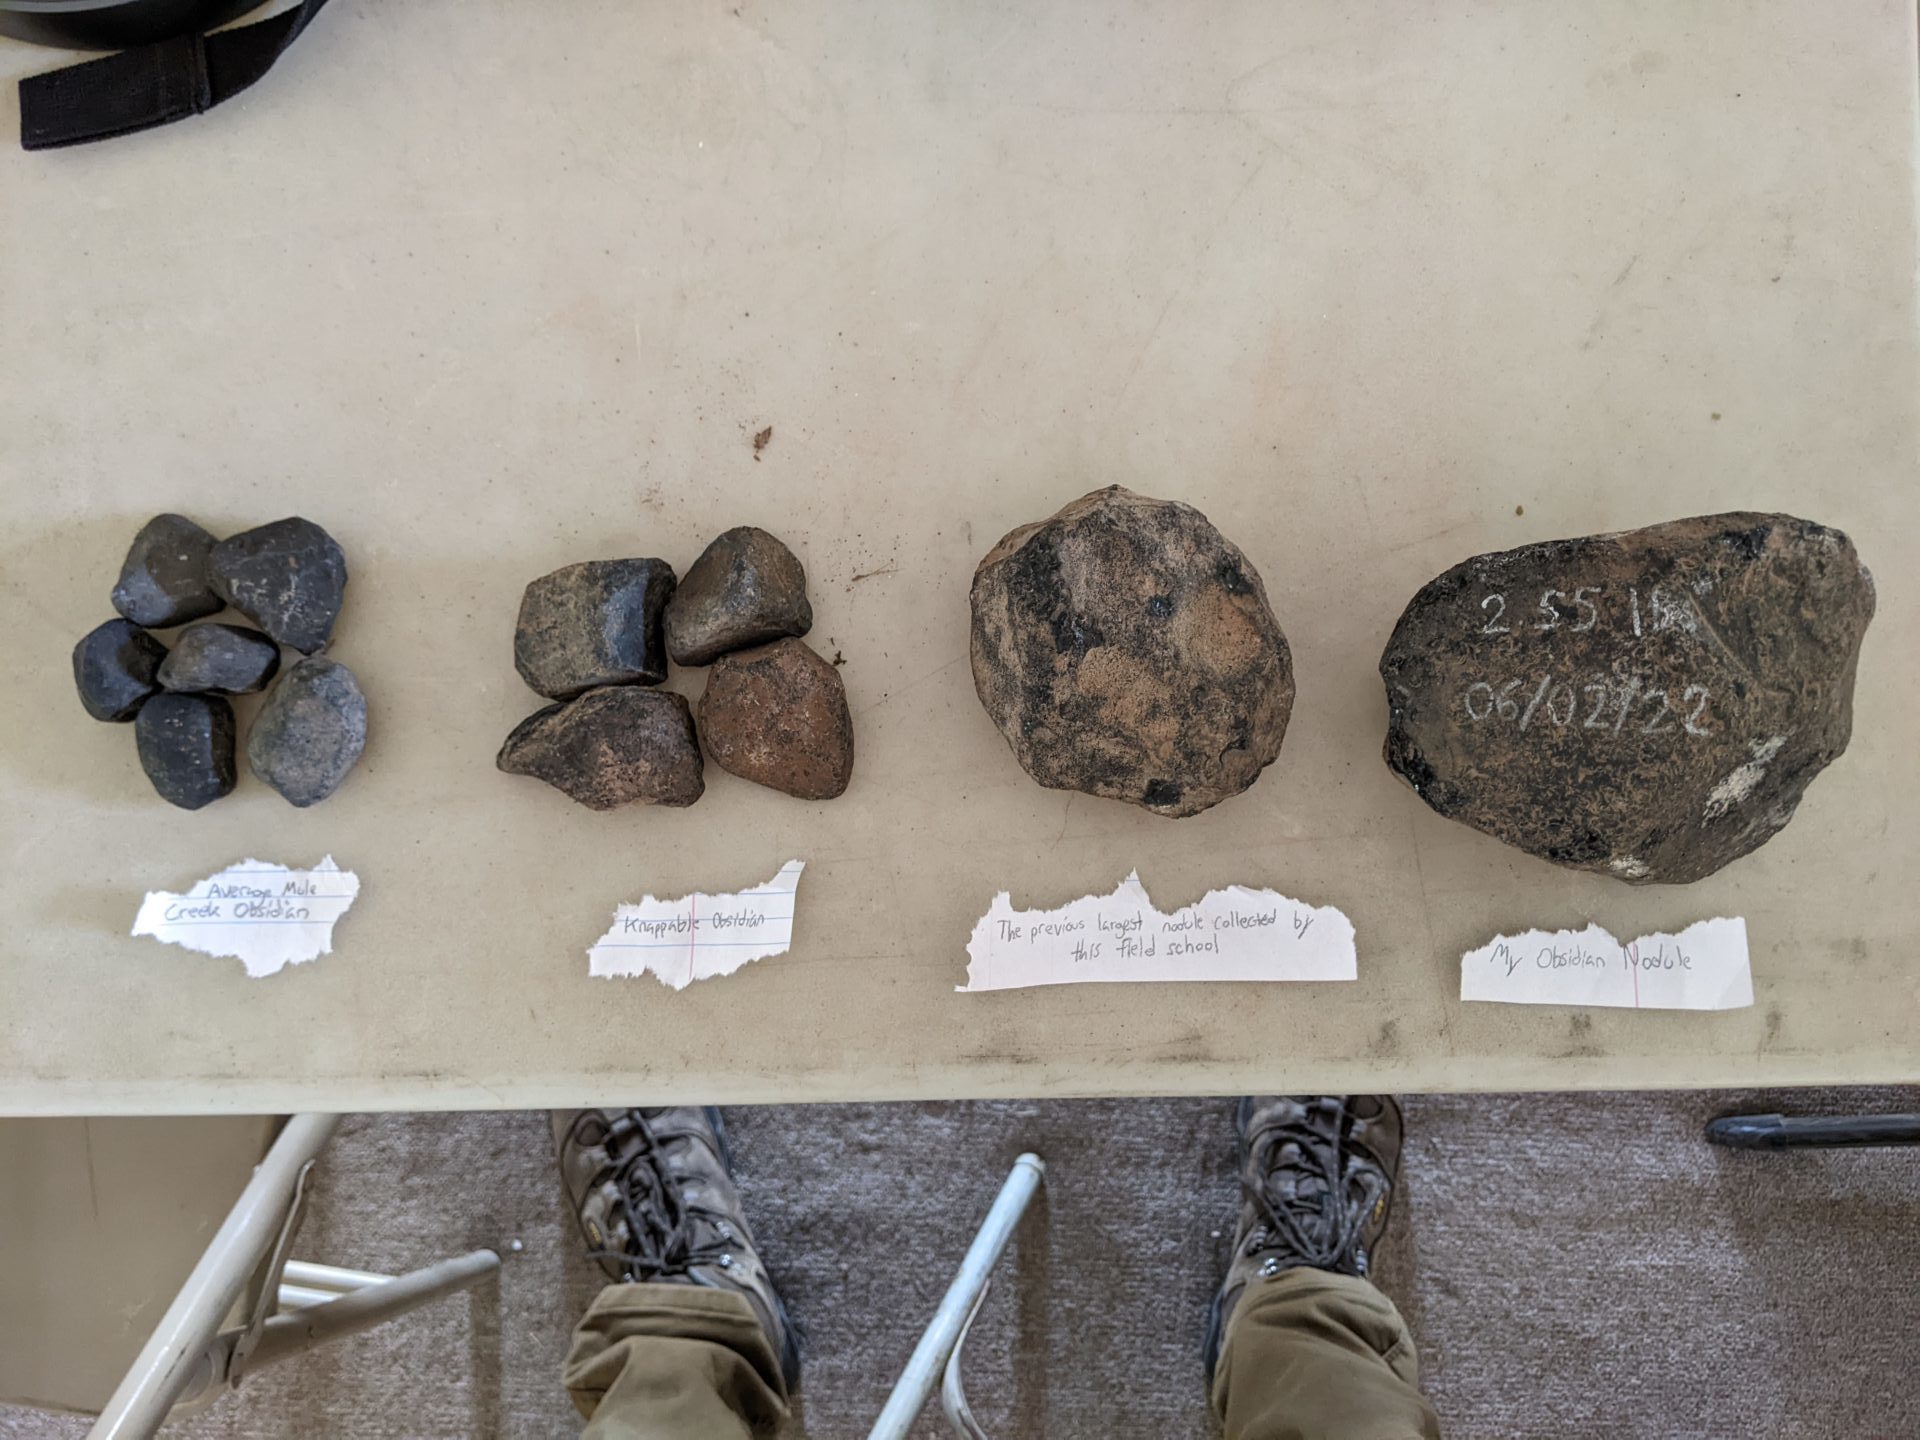 From left to right: The average Mule Creek obsidian nodule; nodules that are large enough to be knapped; the previous largest obsidian nodule collected at this field school; and my obsidian nodule.